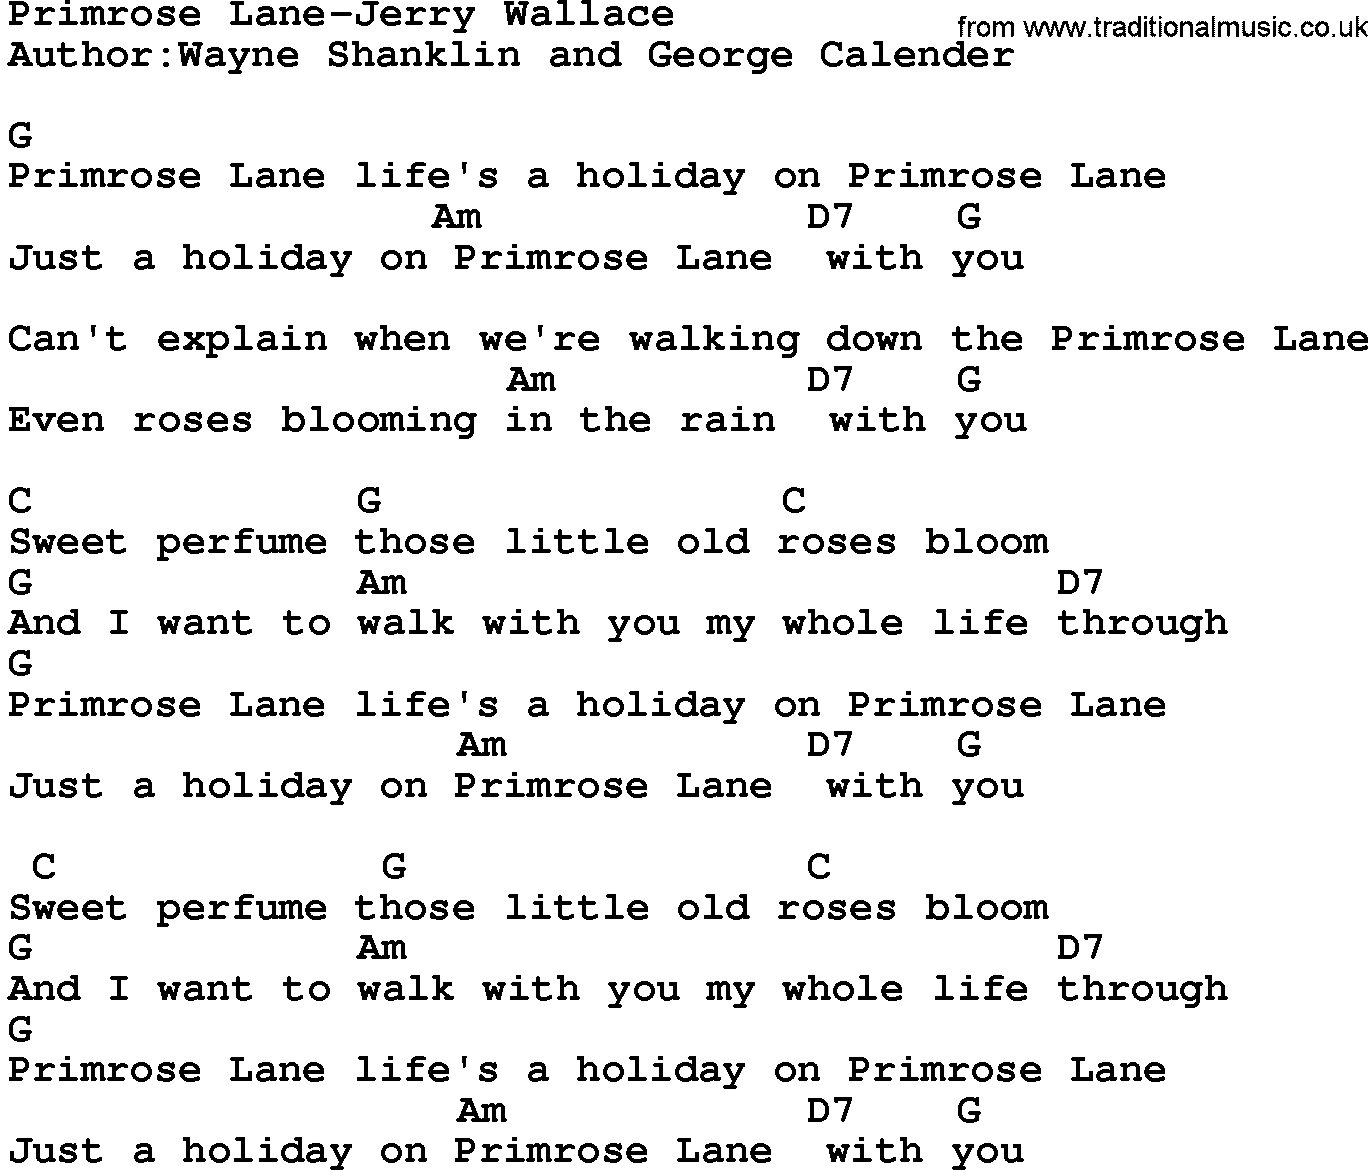 Country music song: Primrose Lane-Jerry Wallace lyrics and chords